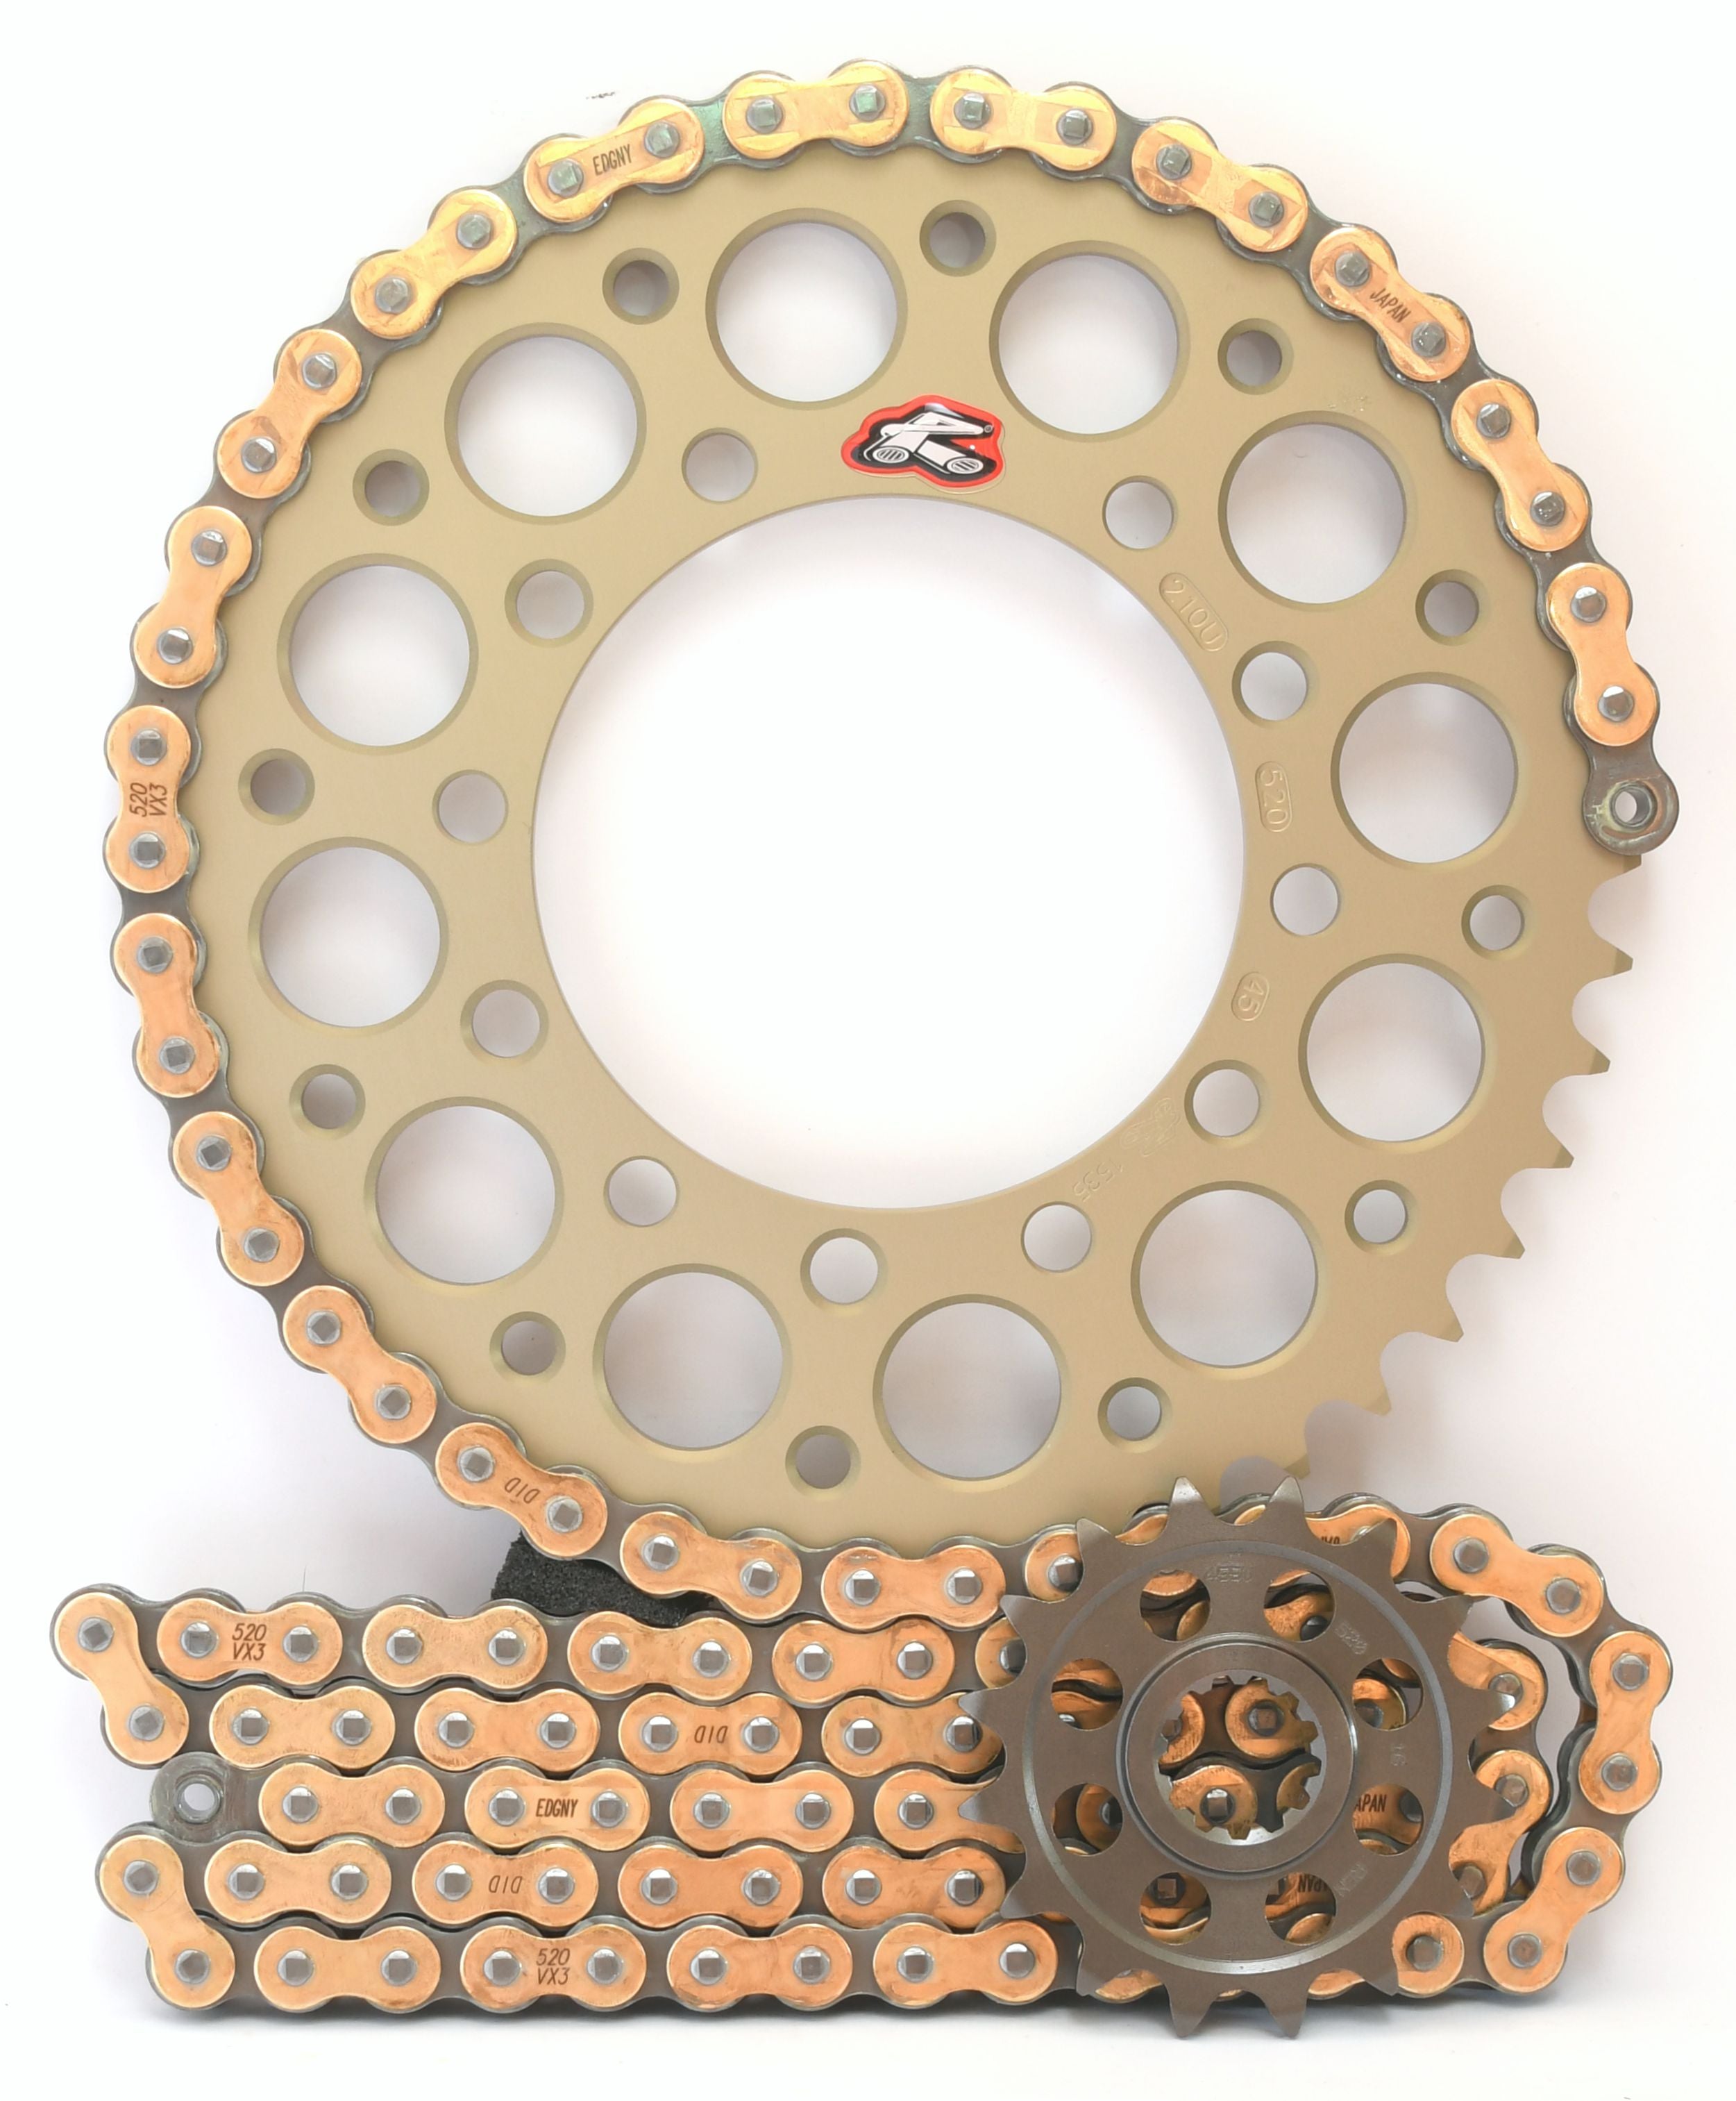 Renthal Ultralight DID Chain & Sprocket Kit for Kawasaki ZX6R 2003-2006 - Choose Your Gearing